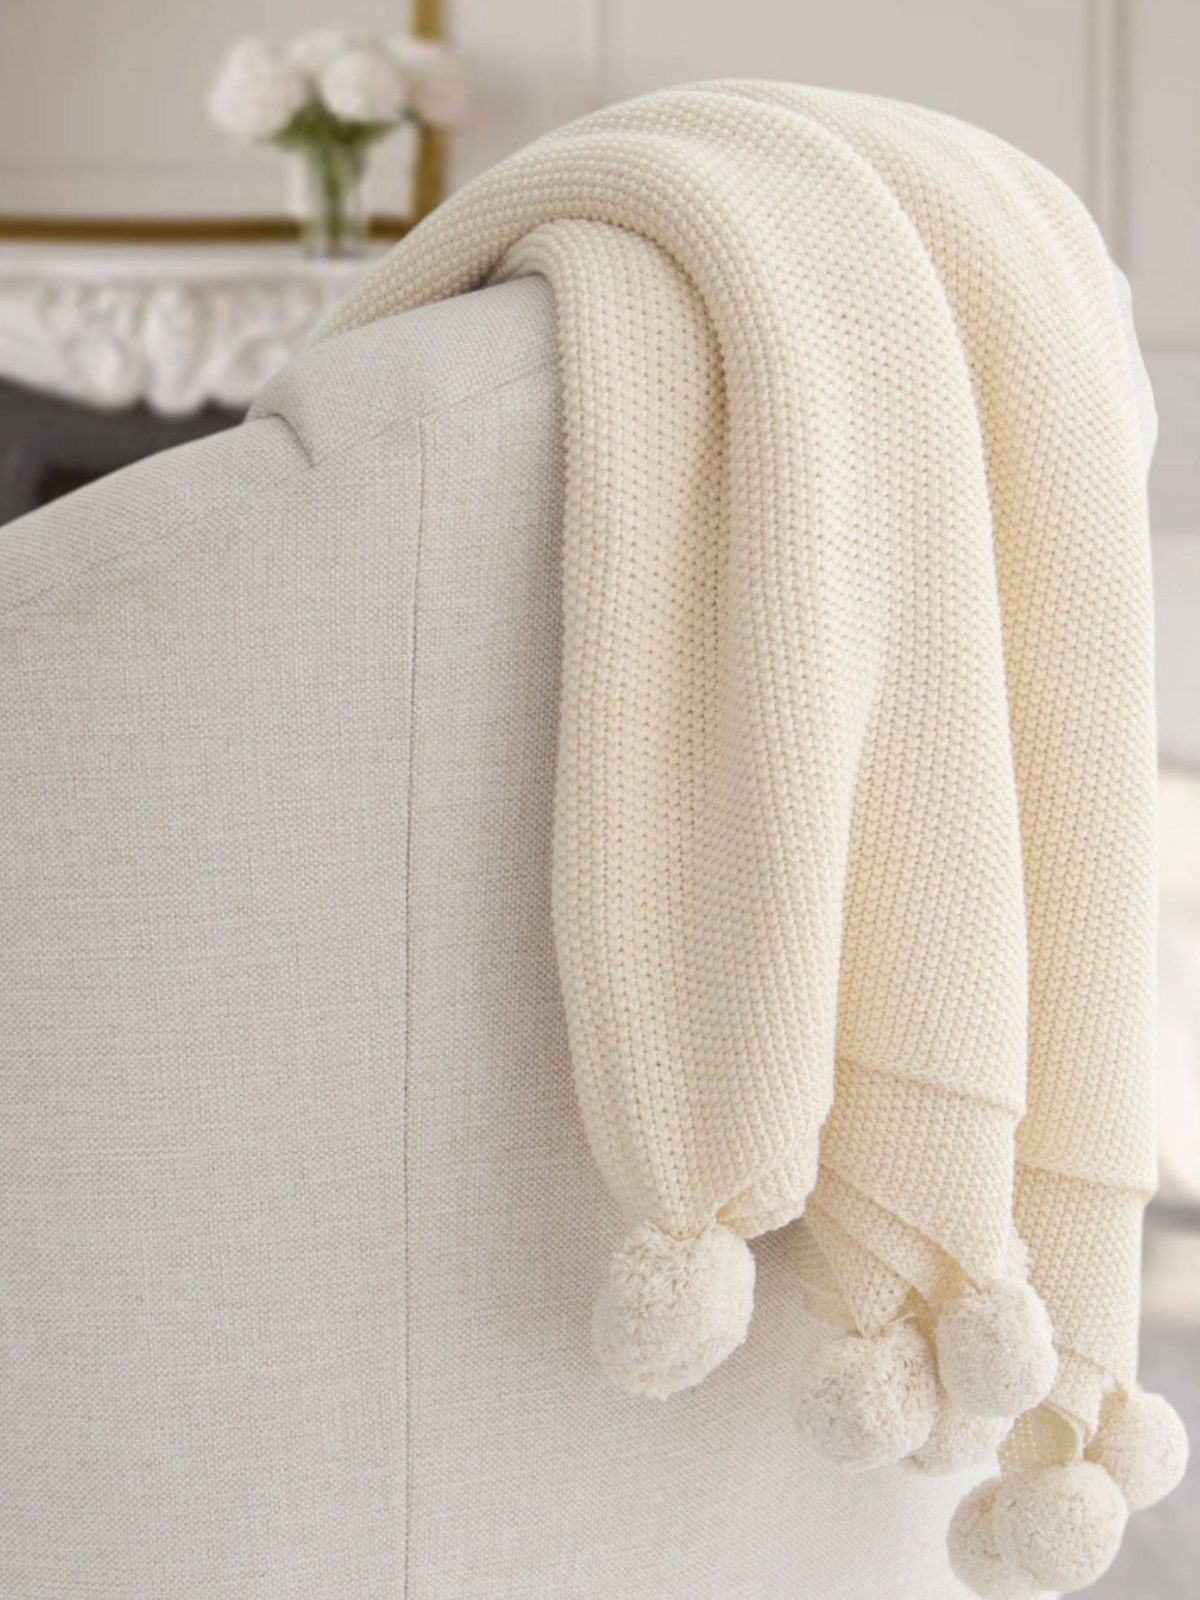 100% Cotton Seedstitch Throw Blanket with Pom Poms in Luxurious Cream Color, 50W x 60L. 